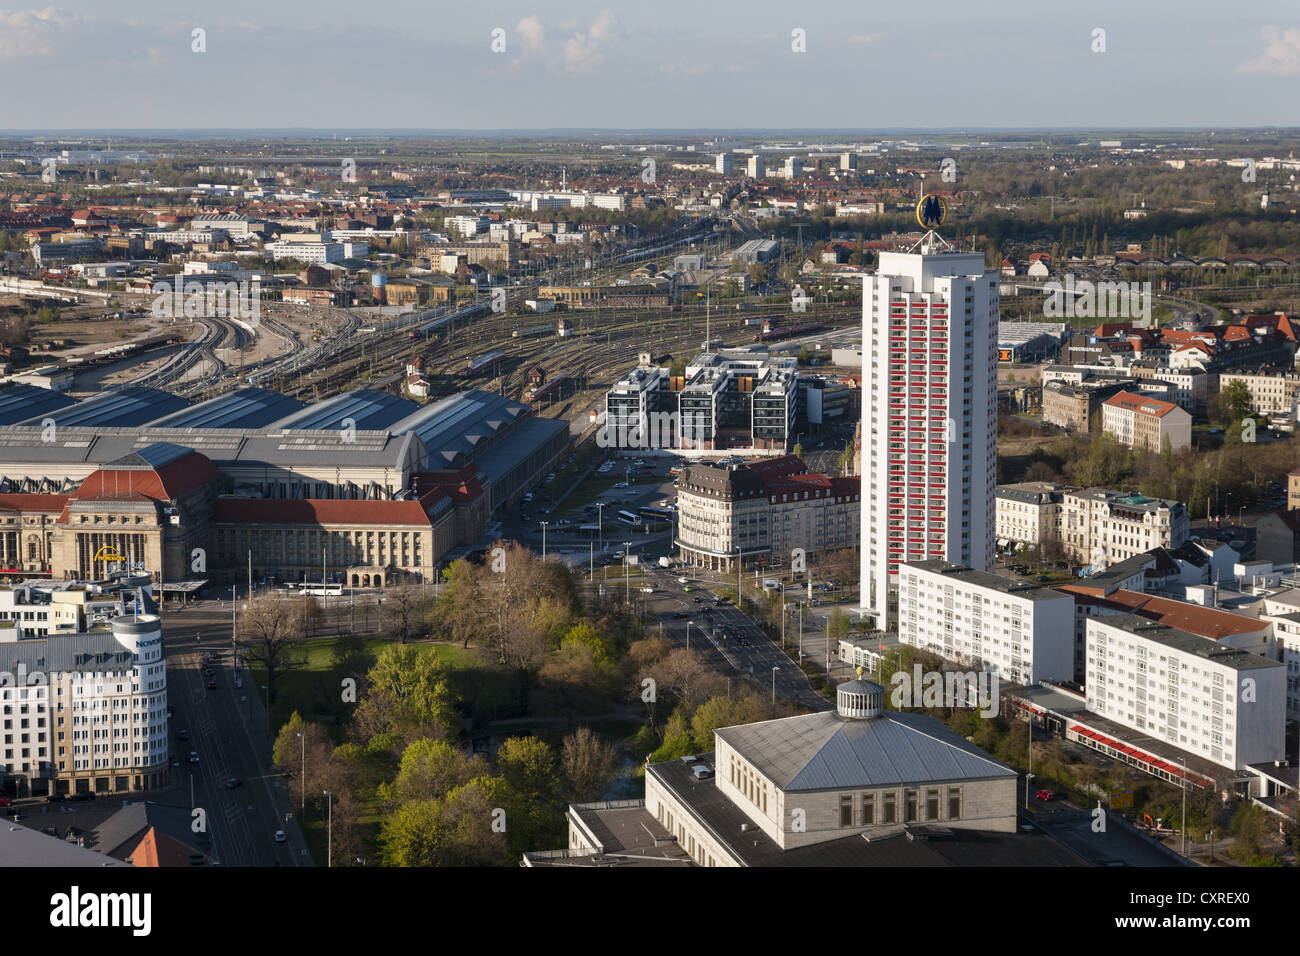 City panorama from the City-Hochhaus building, MDR Tower, looking north over the central railway station and Stock Photo